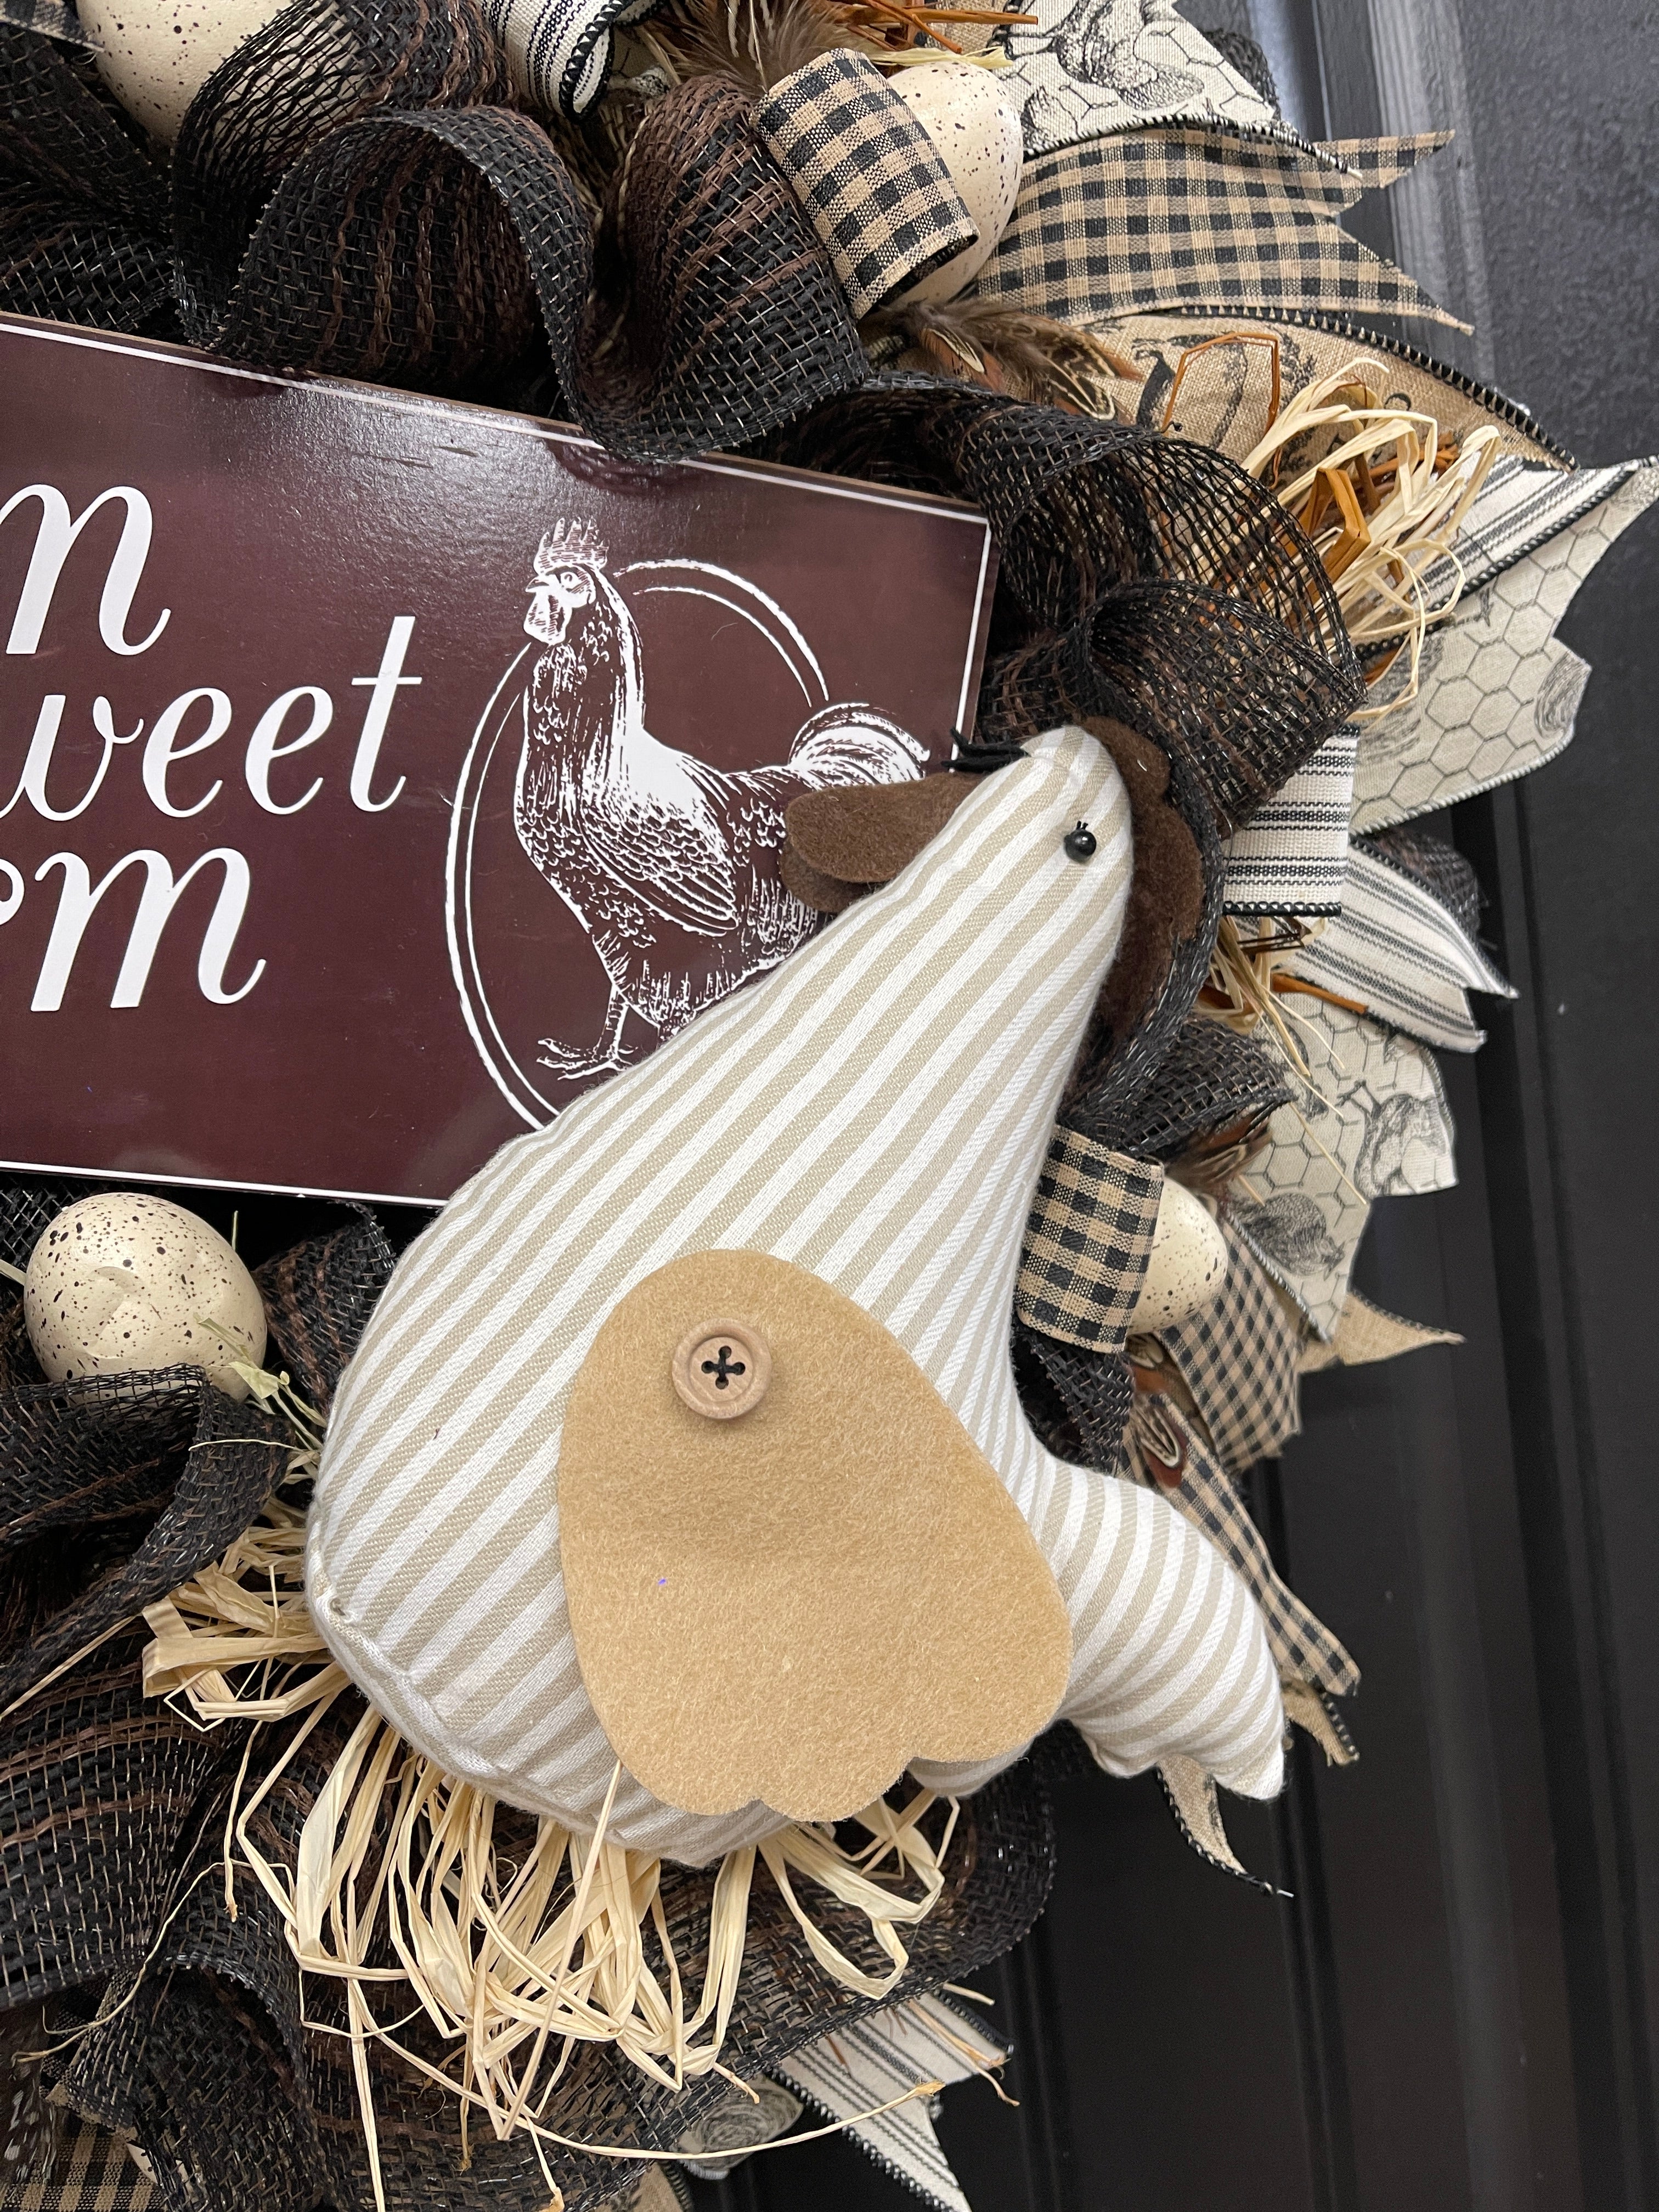 Plush Beige and White Striped Chicken with Felt Wings on a Black, White, Brown and Beige Farm Sweet Farm Chicken Egg Wreath on a Black Door